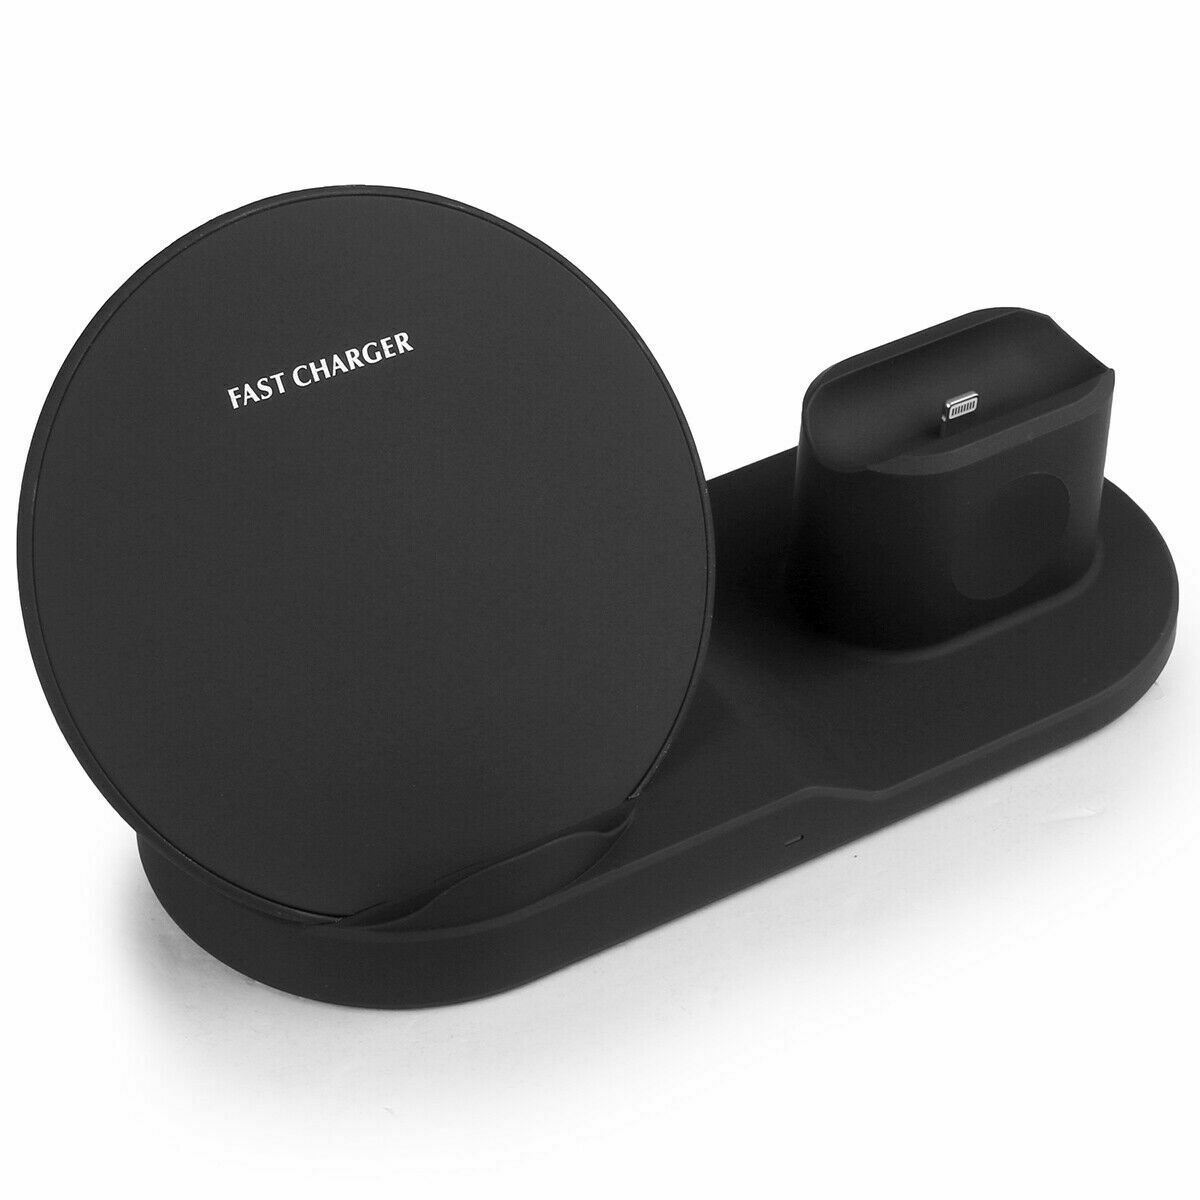 Wireless Fast Charge 3in1 Phone Dock